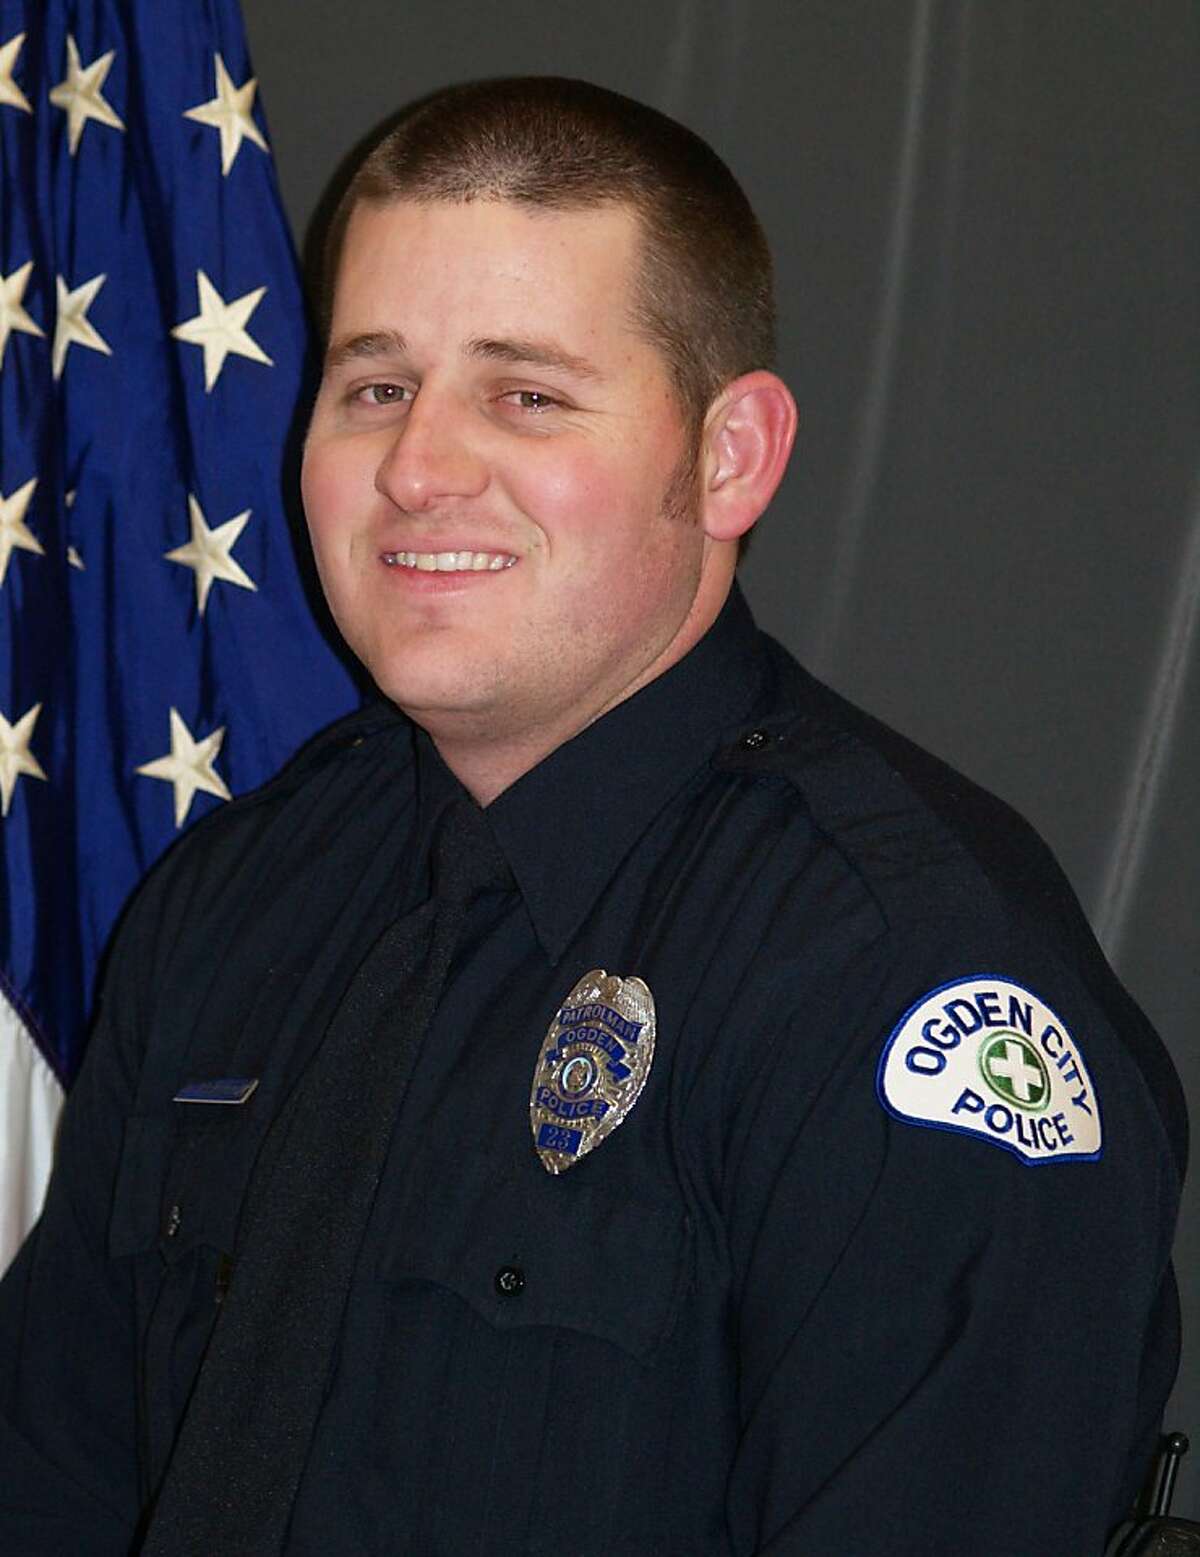 This undated image provided by the Ogden Police Department on Thursday, Jan. 5, 2011 shows Officer Jared Francom who was killed Jan. 4, 2012 during a drug raid in Ogden, Utah. The shootout that erupted when police raided a Utah house on Wednesday also wounded five other officers and the suspect, authorities said. (AP Photo/Ogden Police Department)